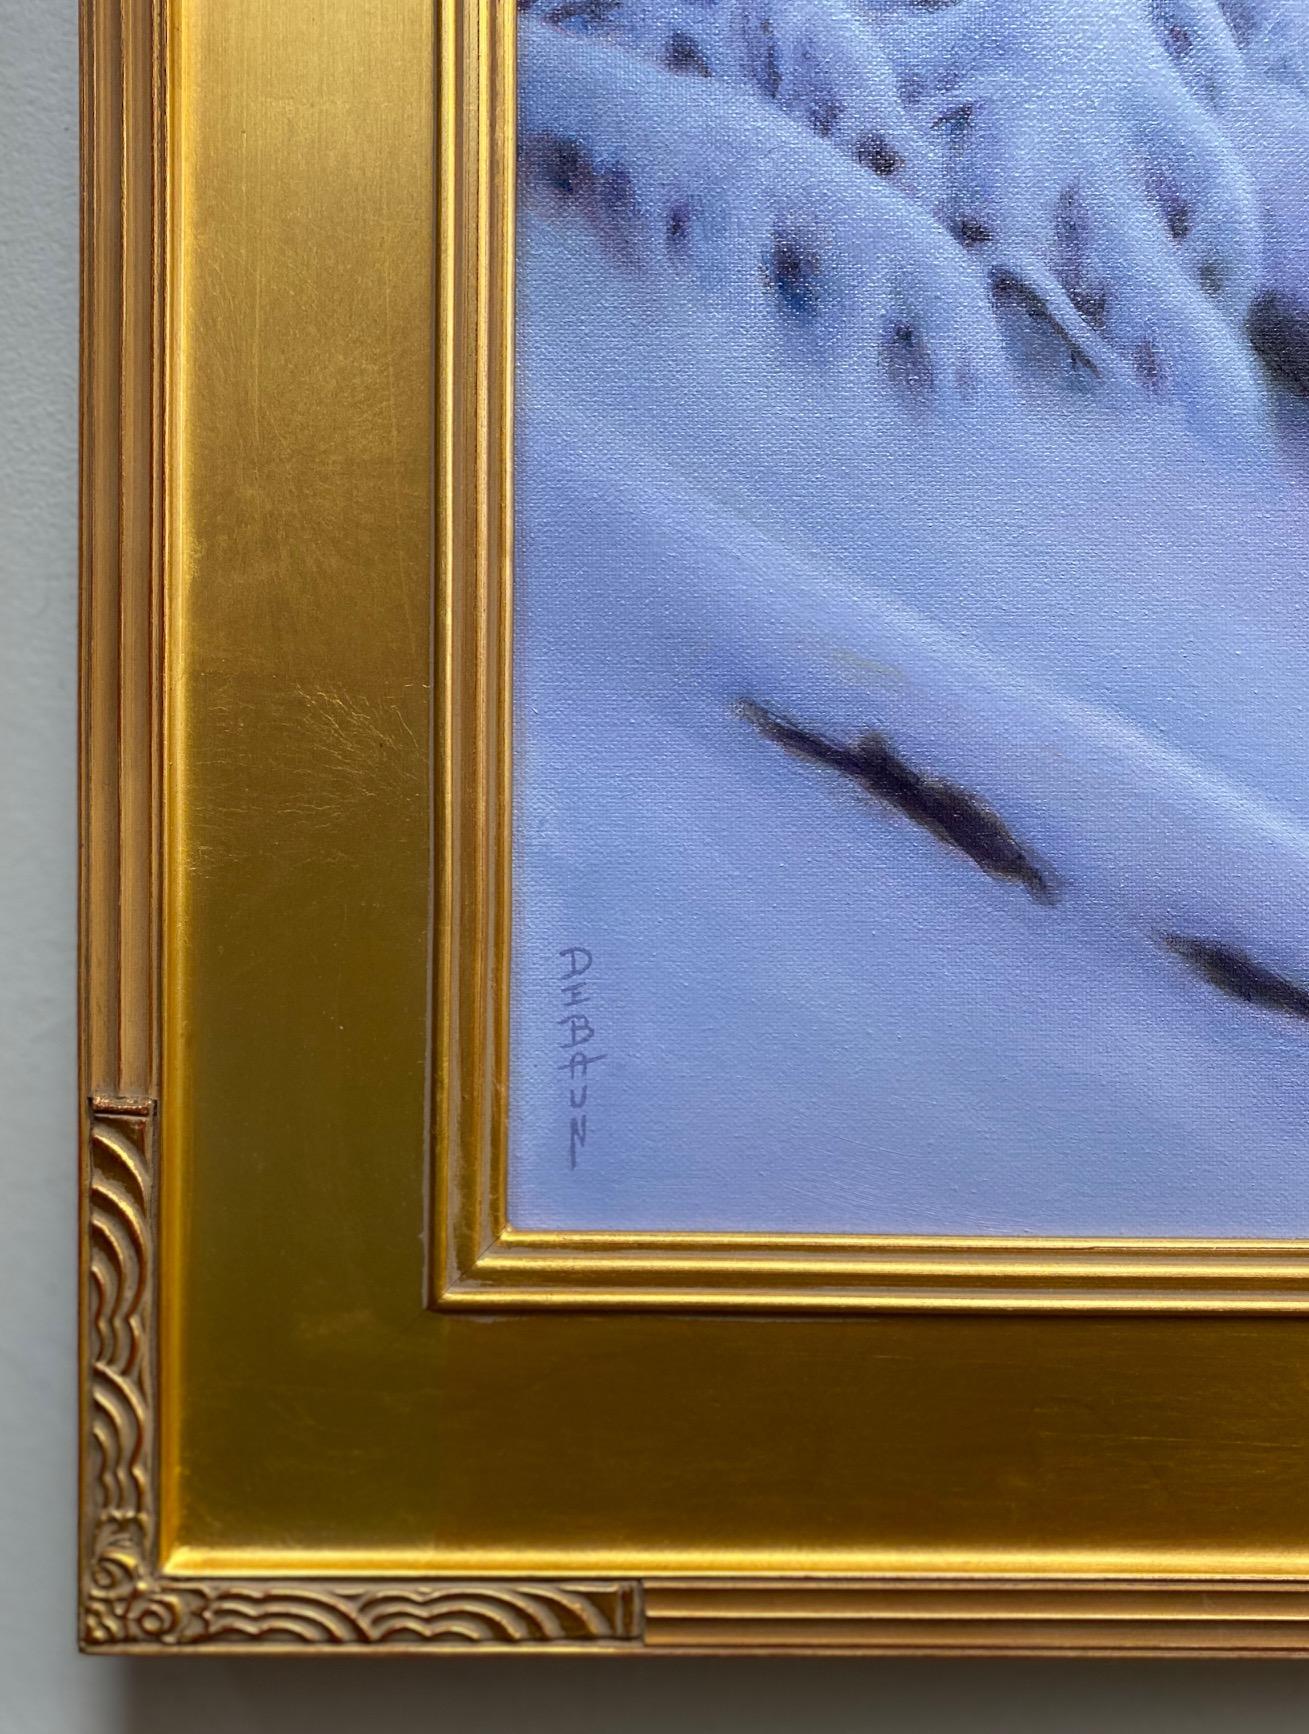 An award winning painting, Winter Woods is a clean and crisp, tender original realistic oil painting by multiple award winning New York Hudson River painter Barry DeBaun.  Feel the freedom of thought and joy as dog and master meander through the